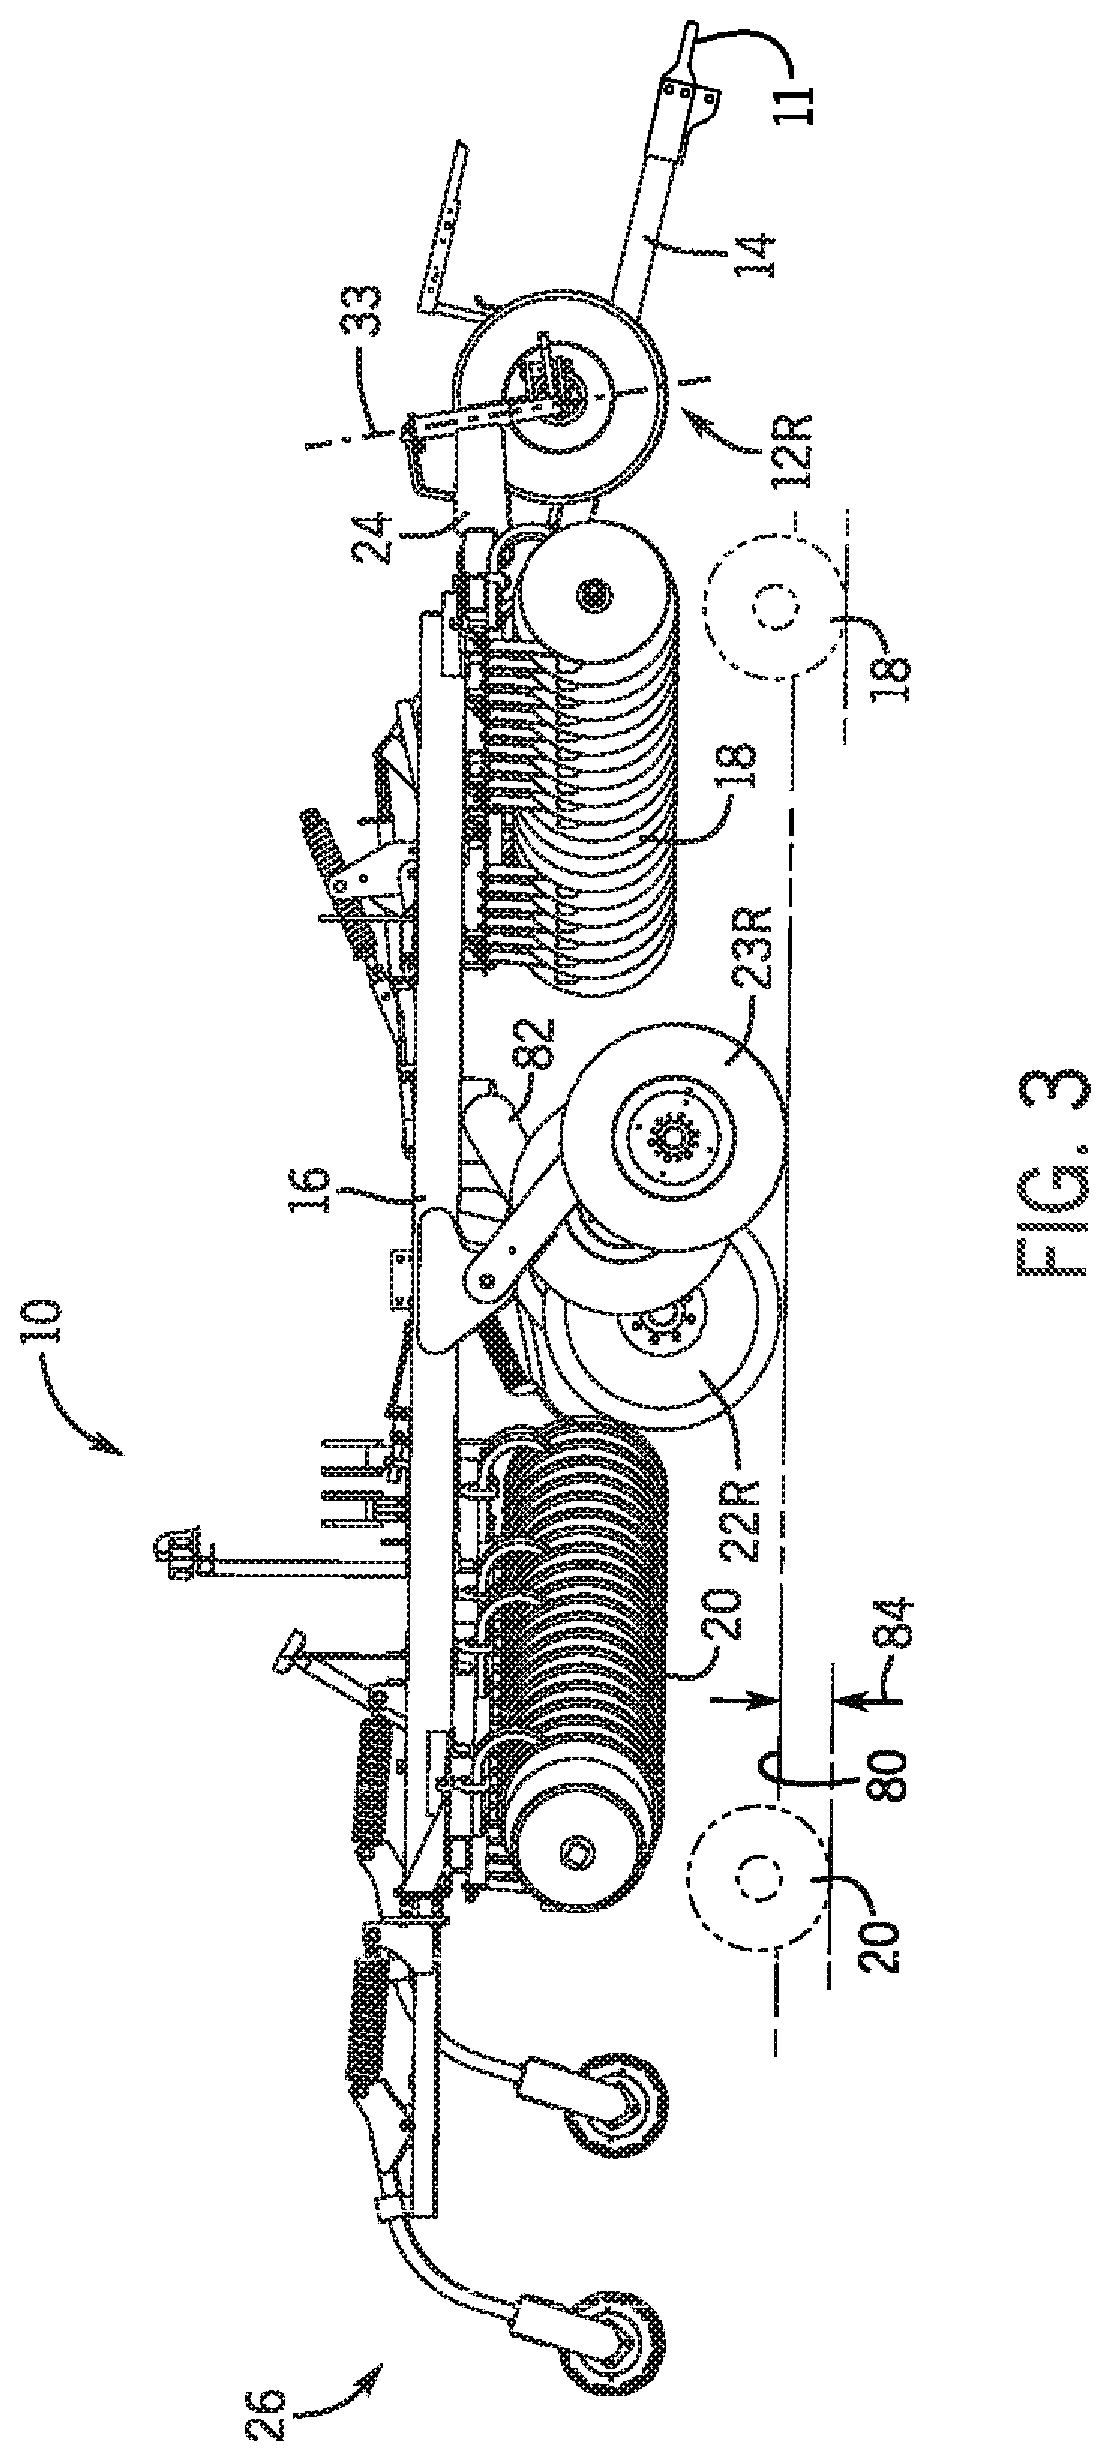 Remote hydraulic actuation and positioning of a plurality of implement stabilizer wheels